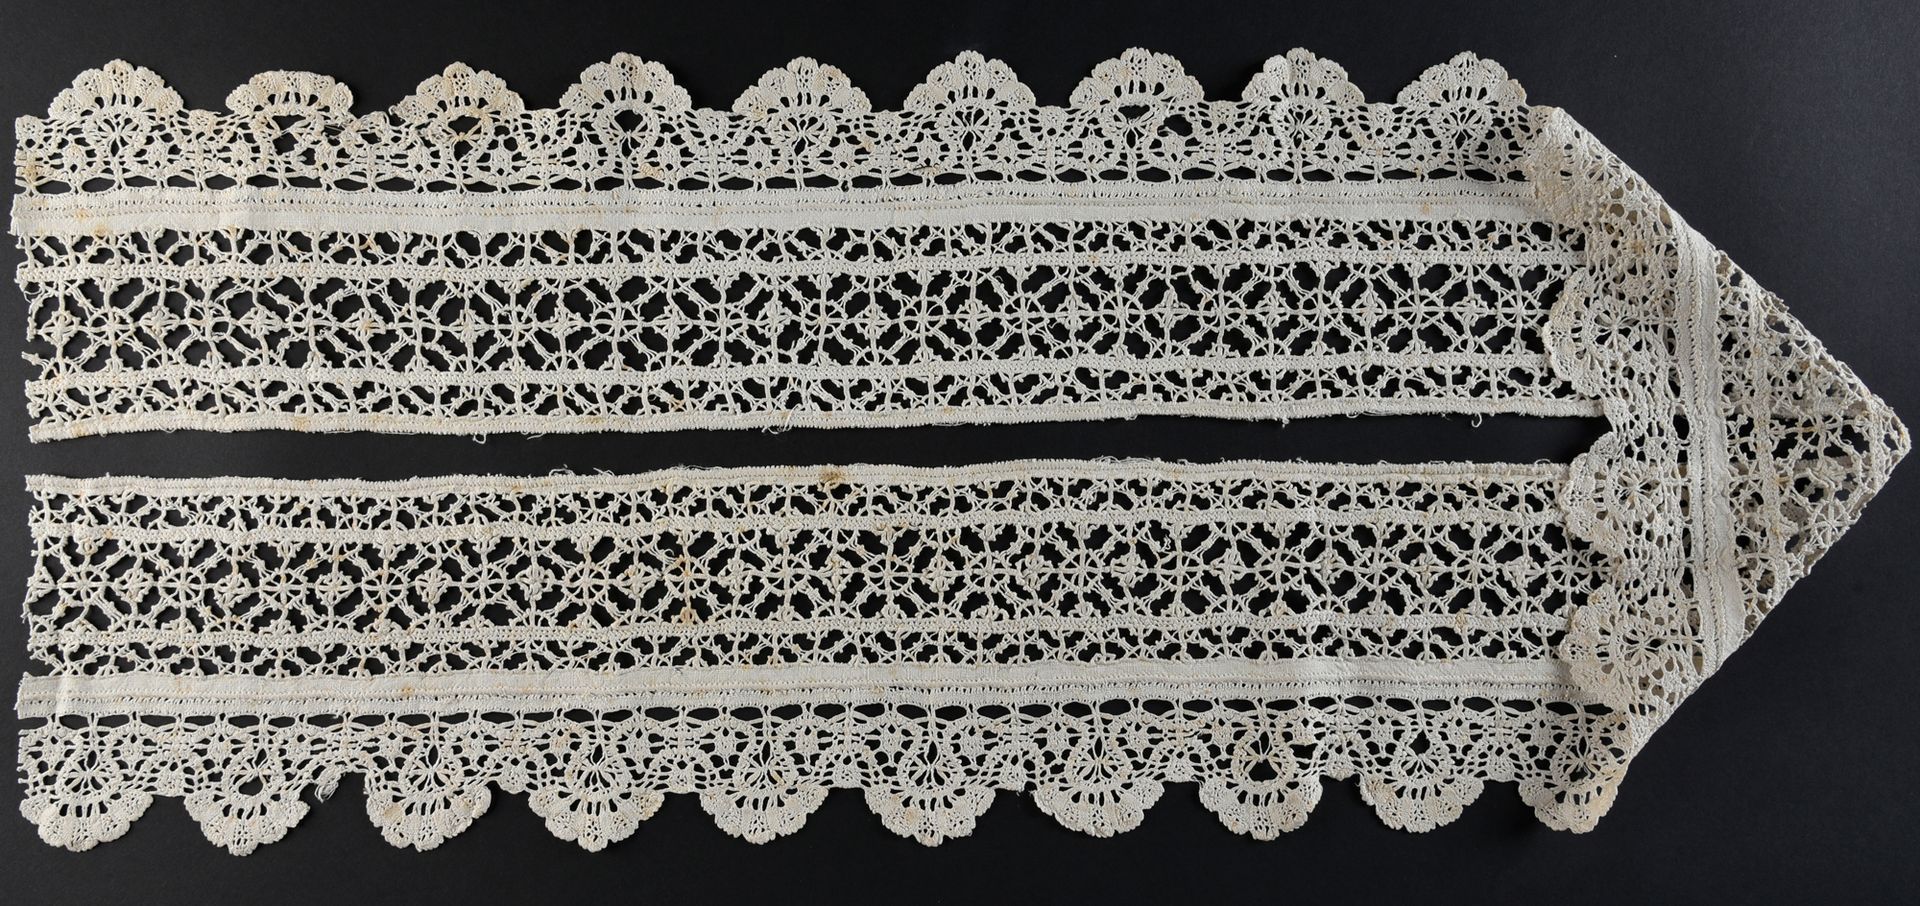 Null Rare border in Reticella and spindle lace, 16th and early 17th century.

Ve&hellip;